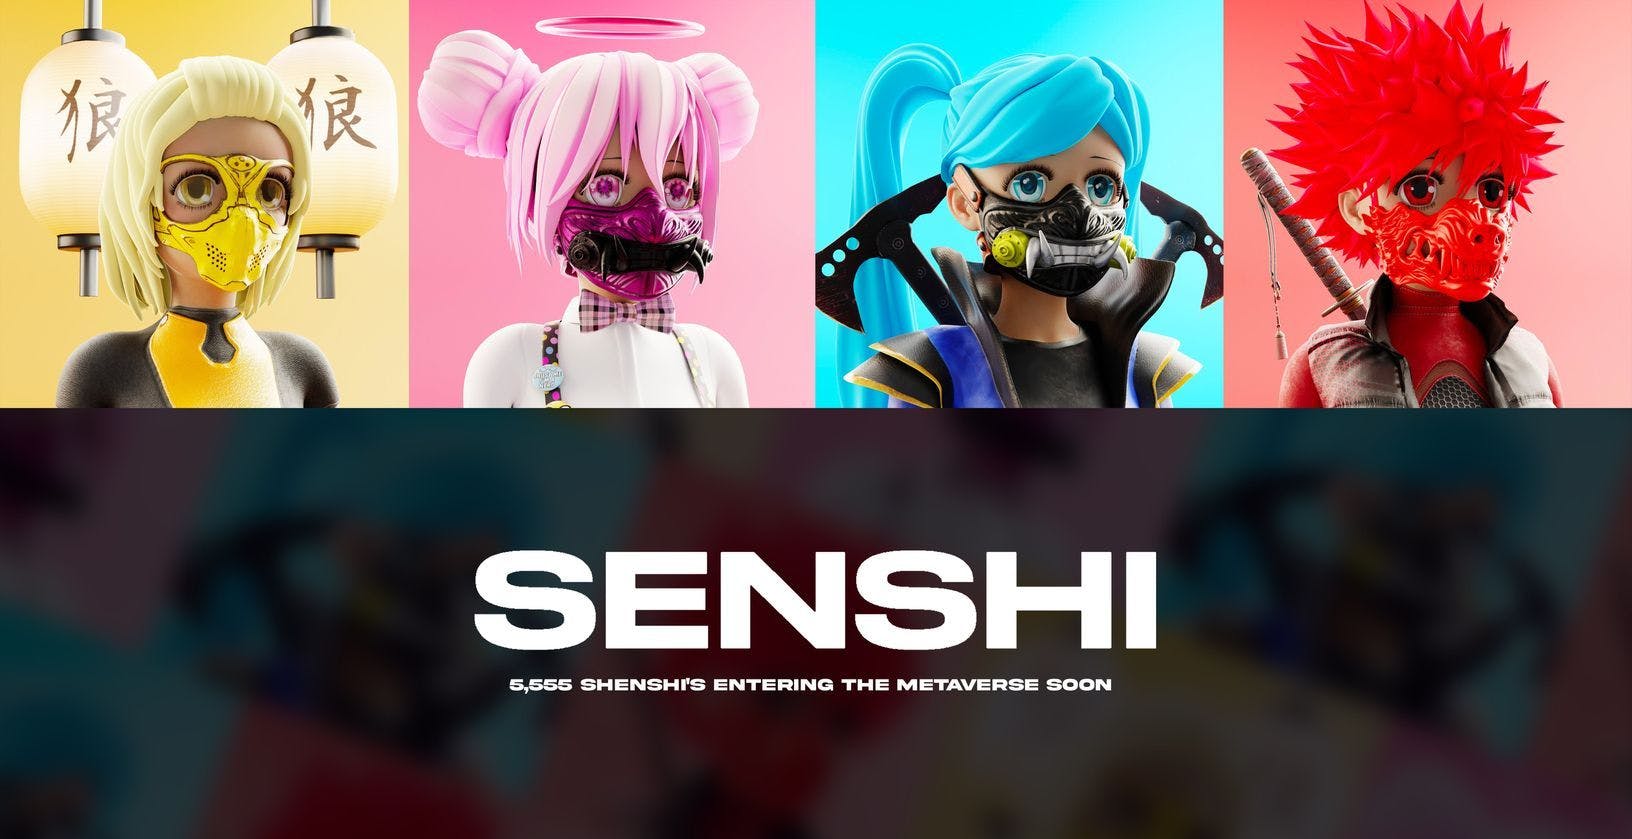 /senshi-is-the-revolutionary-nft-project-that-has-drawn-attention-from-aspiring-artists-and-investors feature image